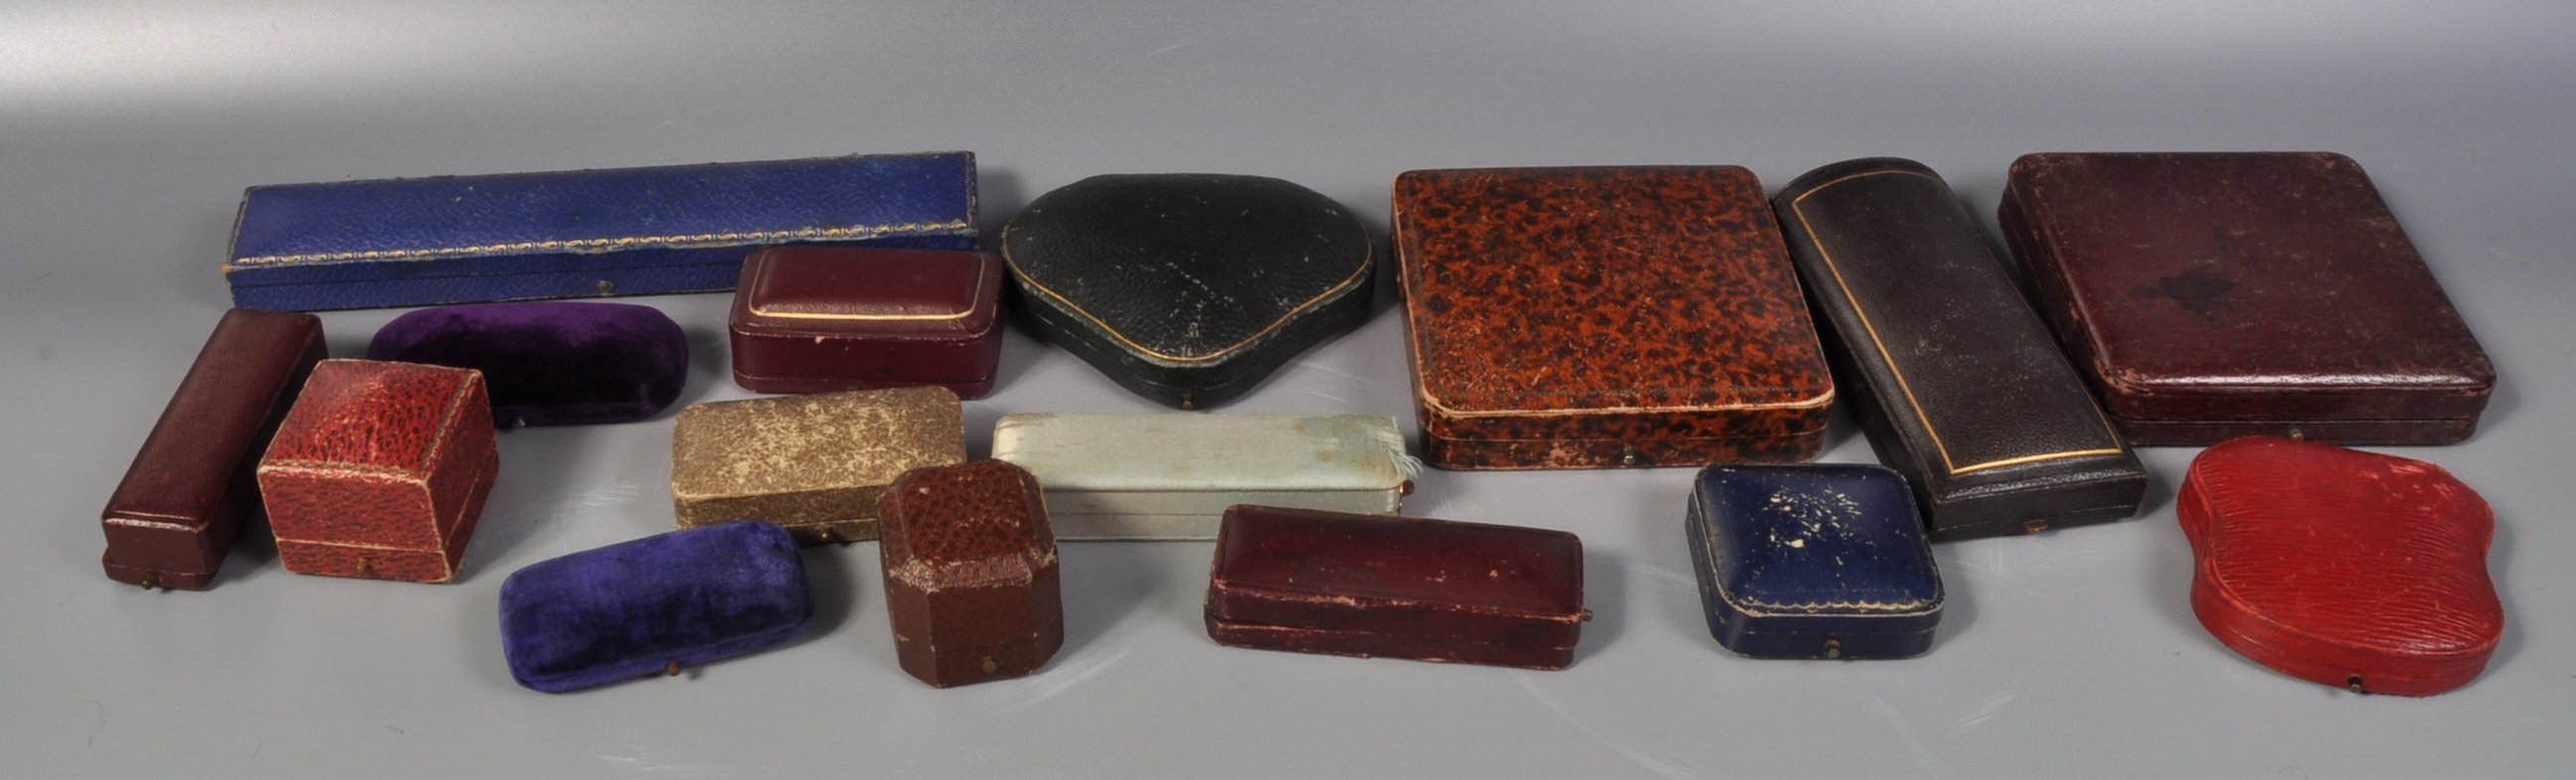 GROUP OF VICTORIAN AND LATER JEWELLERY BOXES - Image 7 of 7